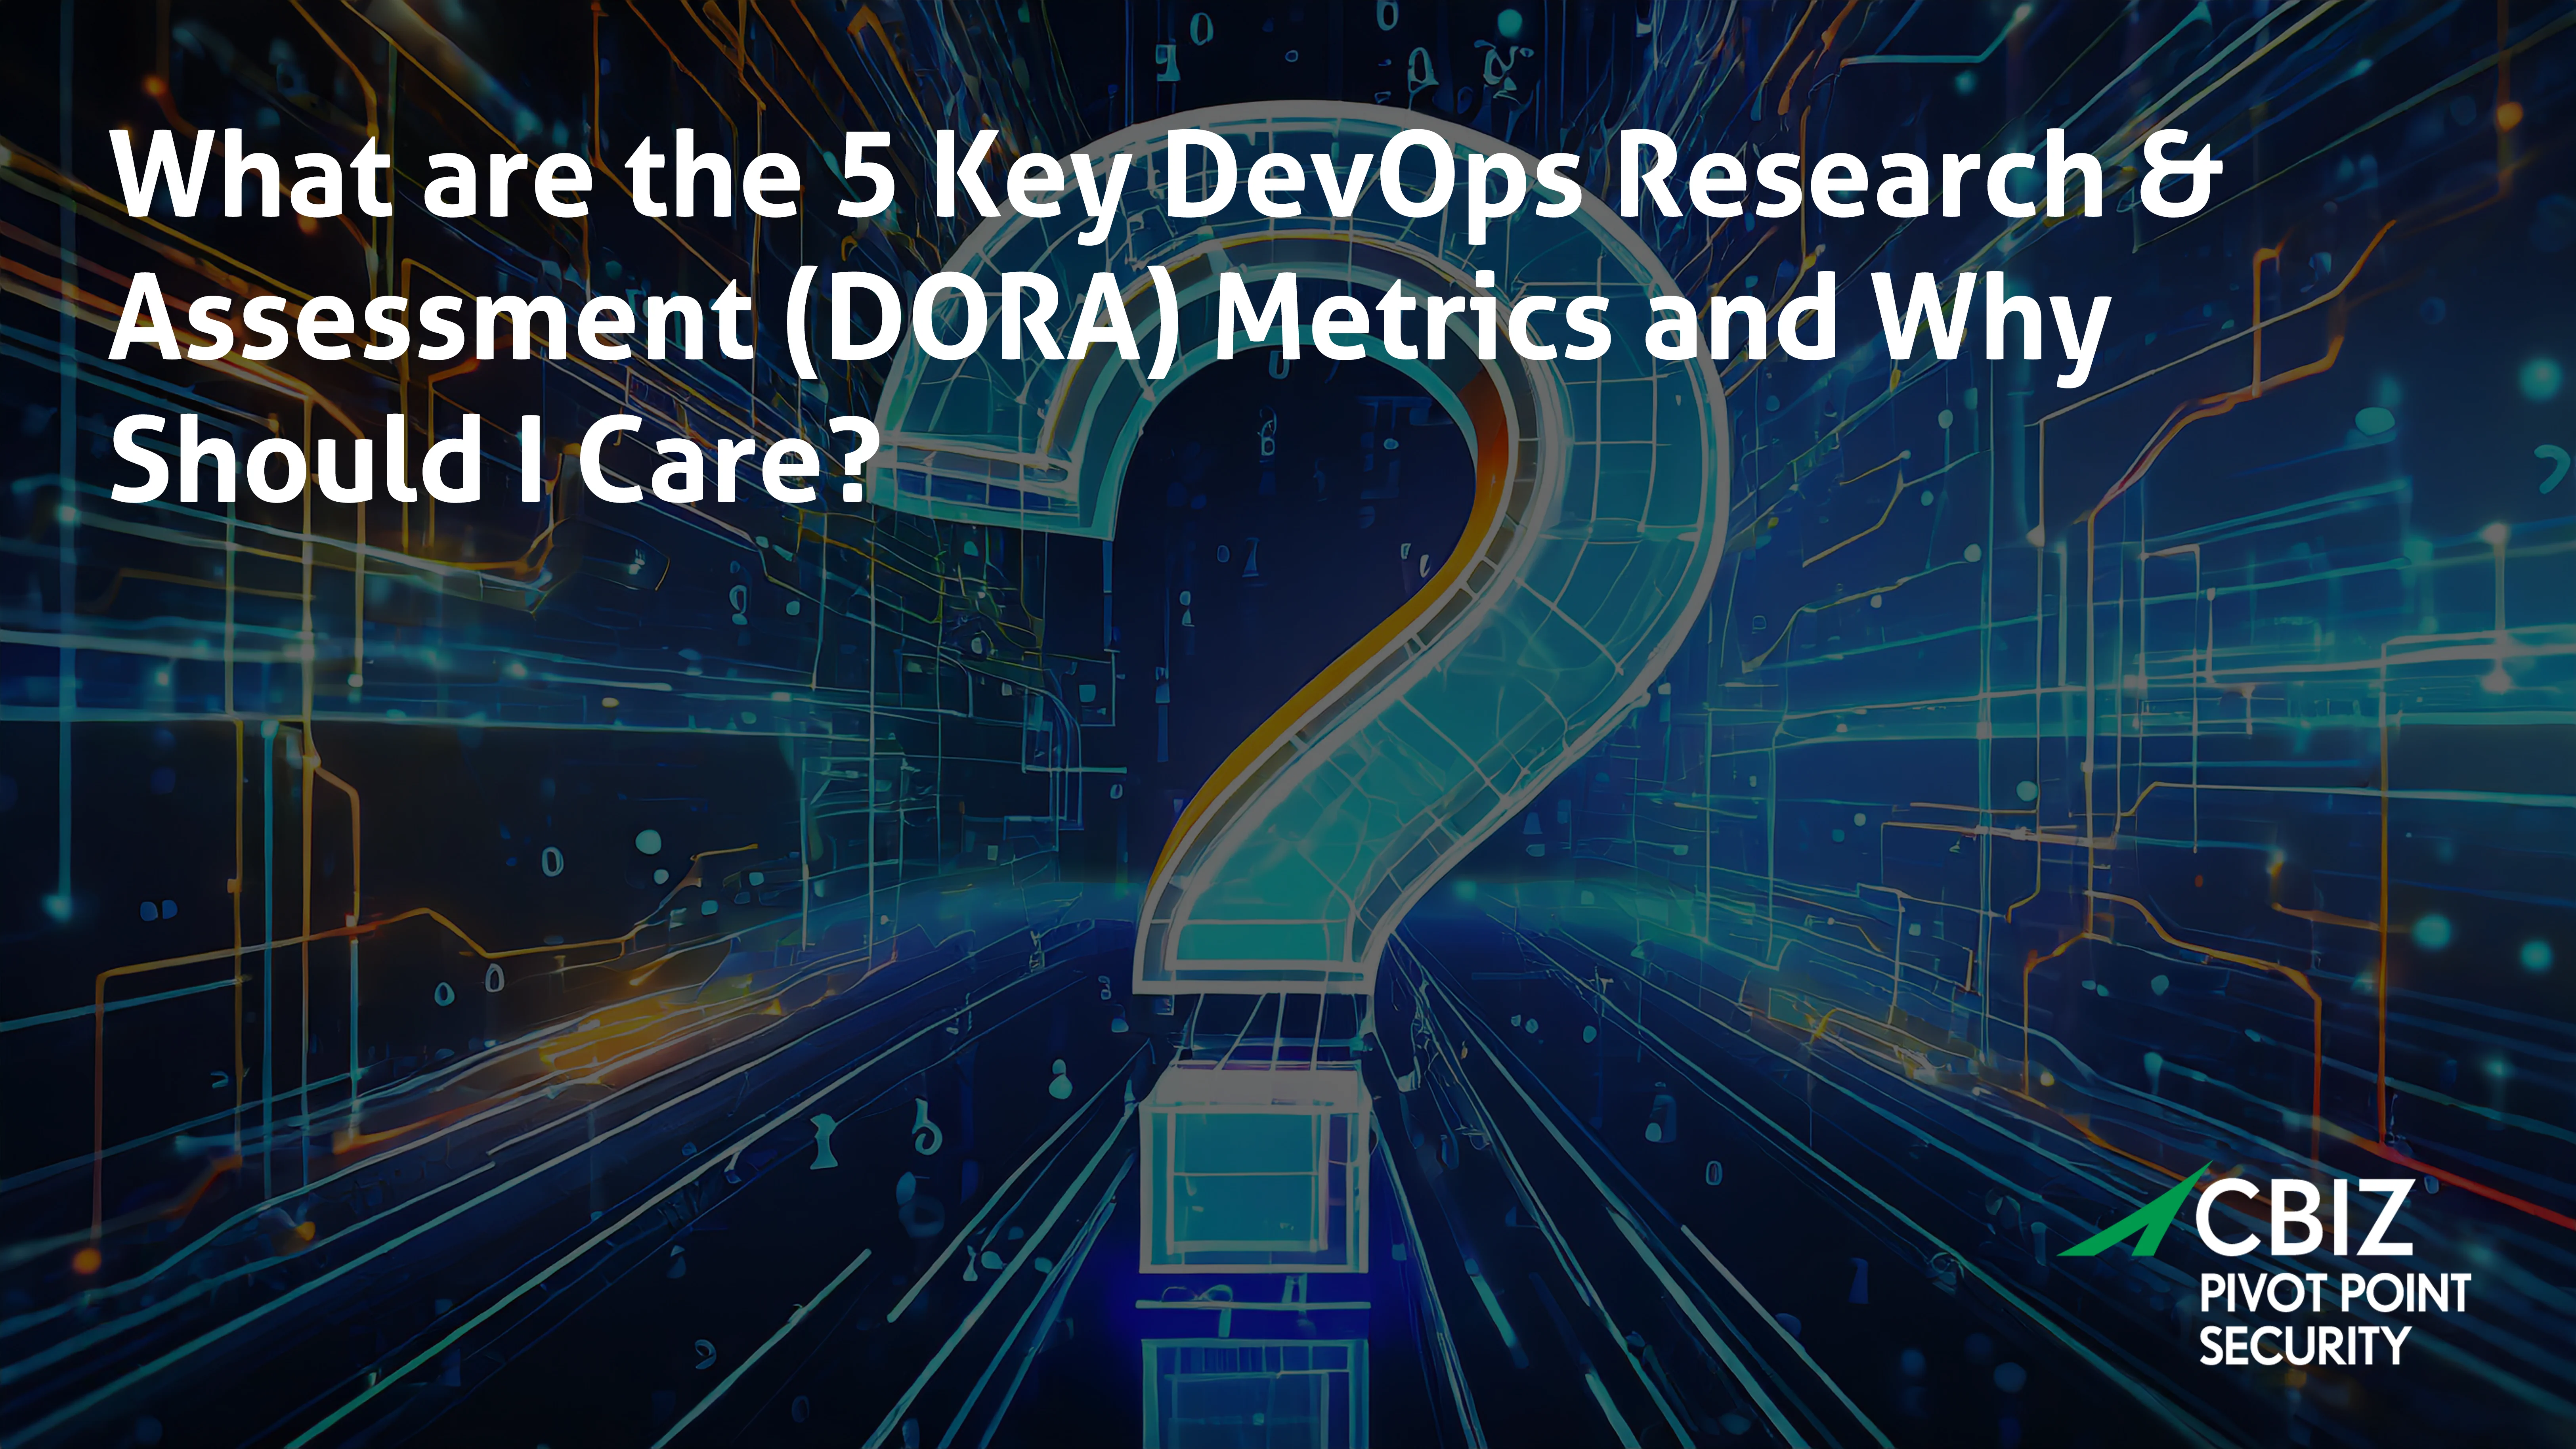 what are the 5 keys devops research and assessement dora metrics and why should i care